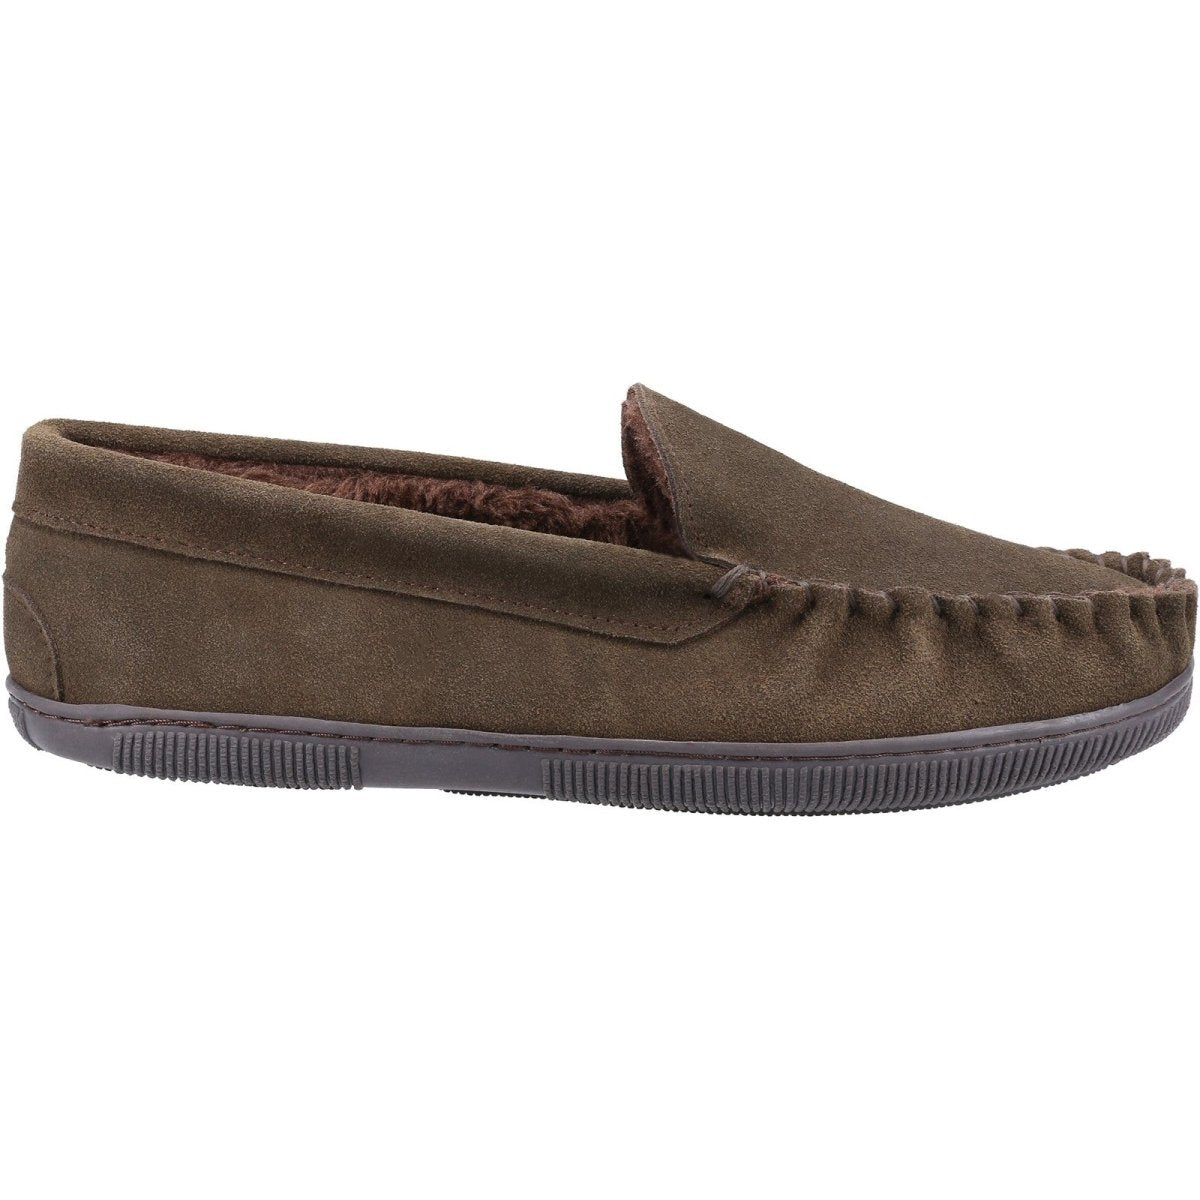 Cotswold Tresham Suede Mens Moccasin Slippers - Shoe Store Direct